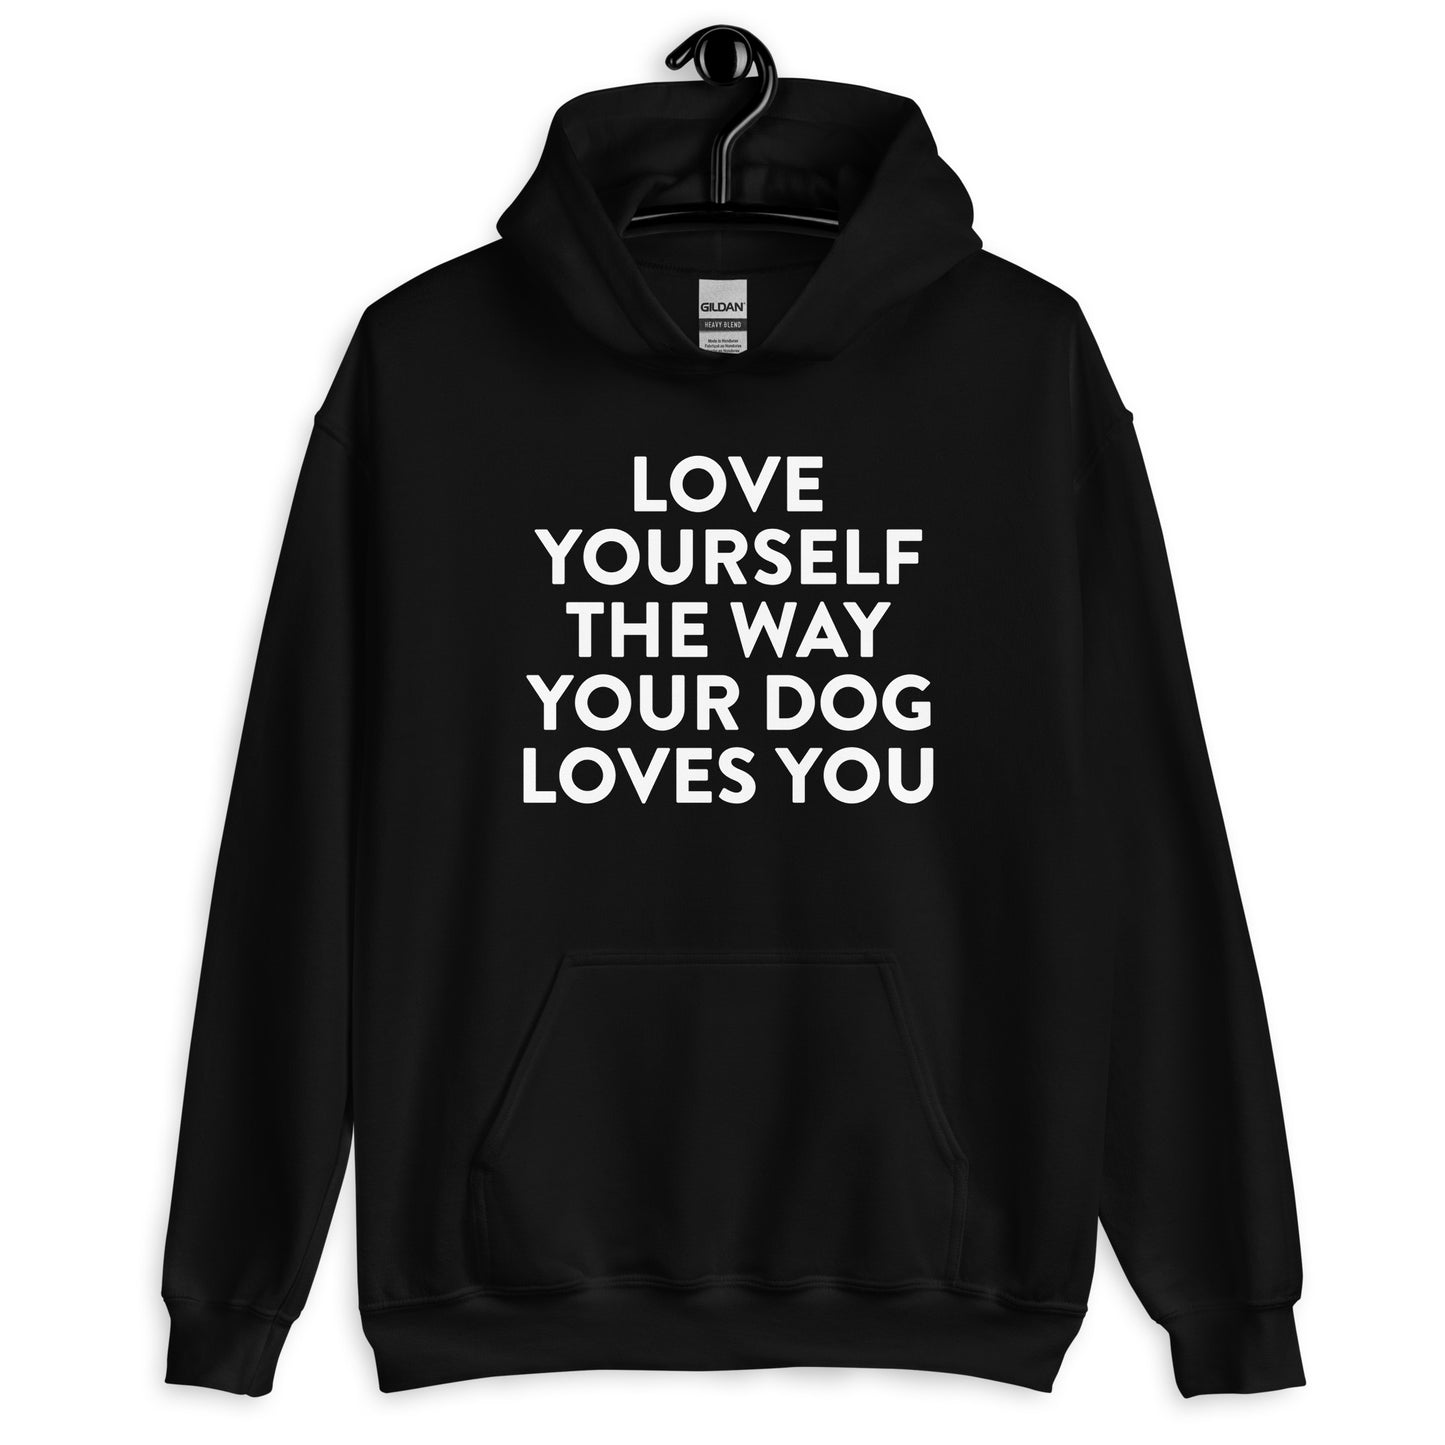 Love Yourself The Way Your Dog Loves You Unisex Hoodie